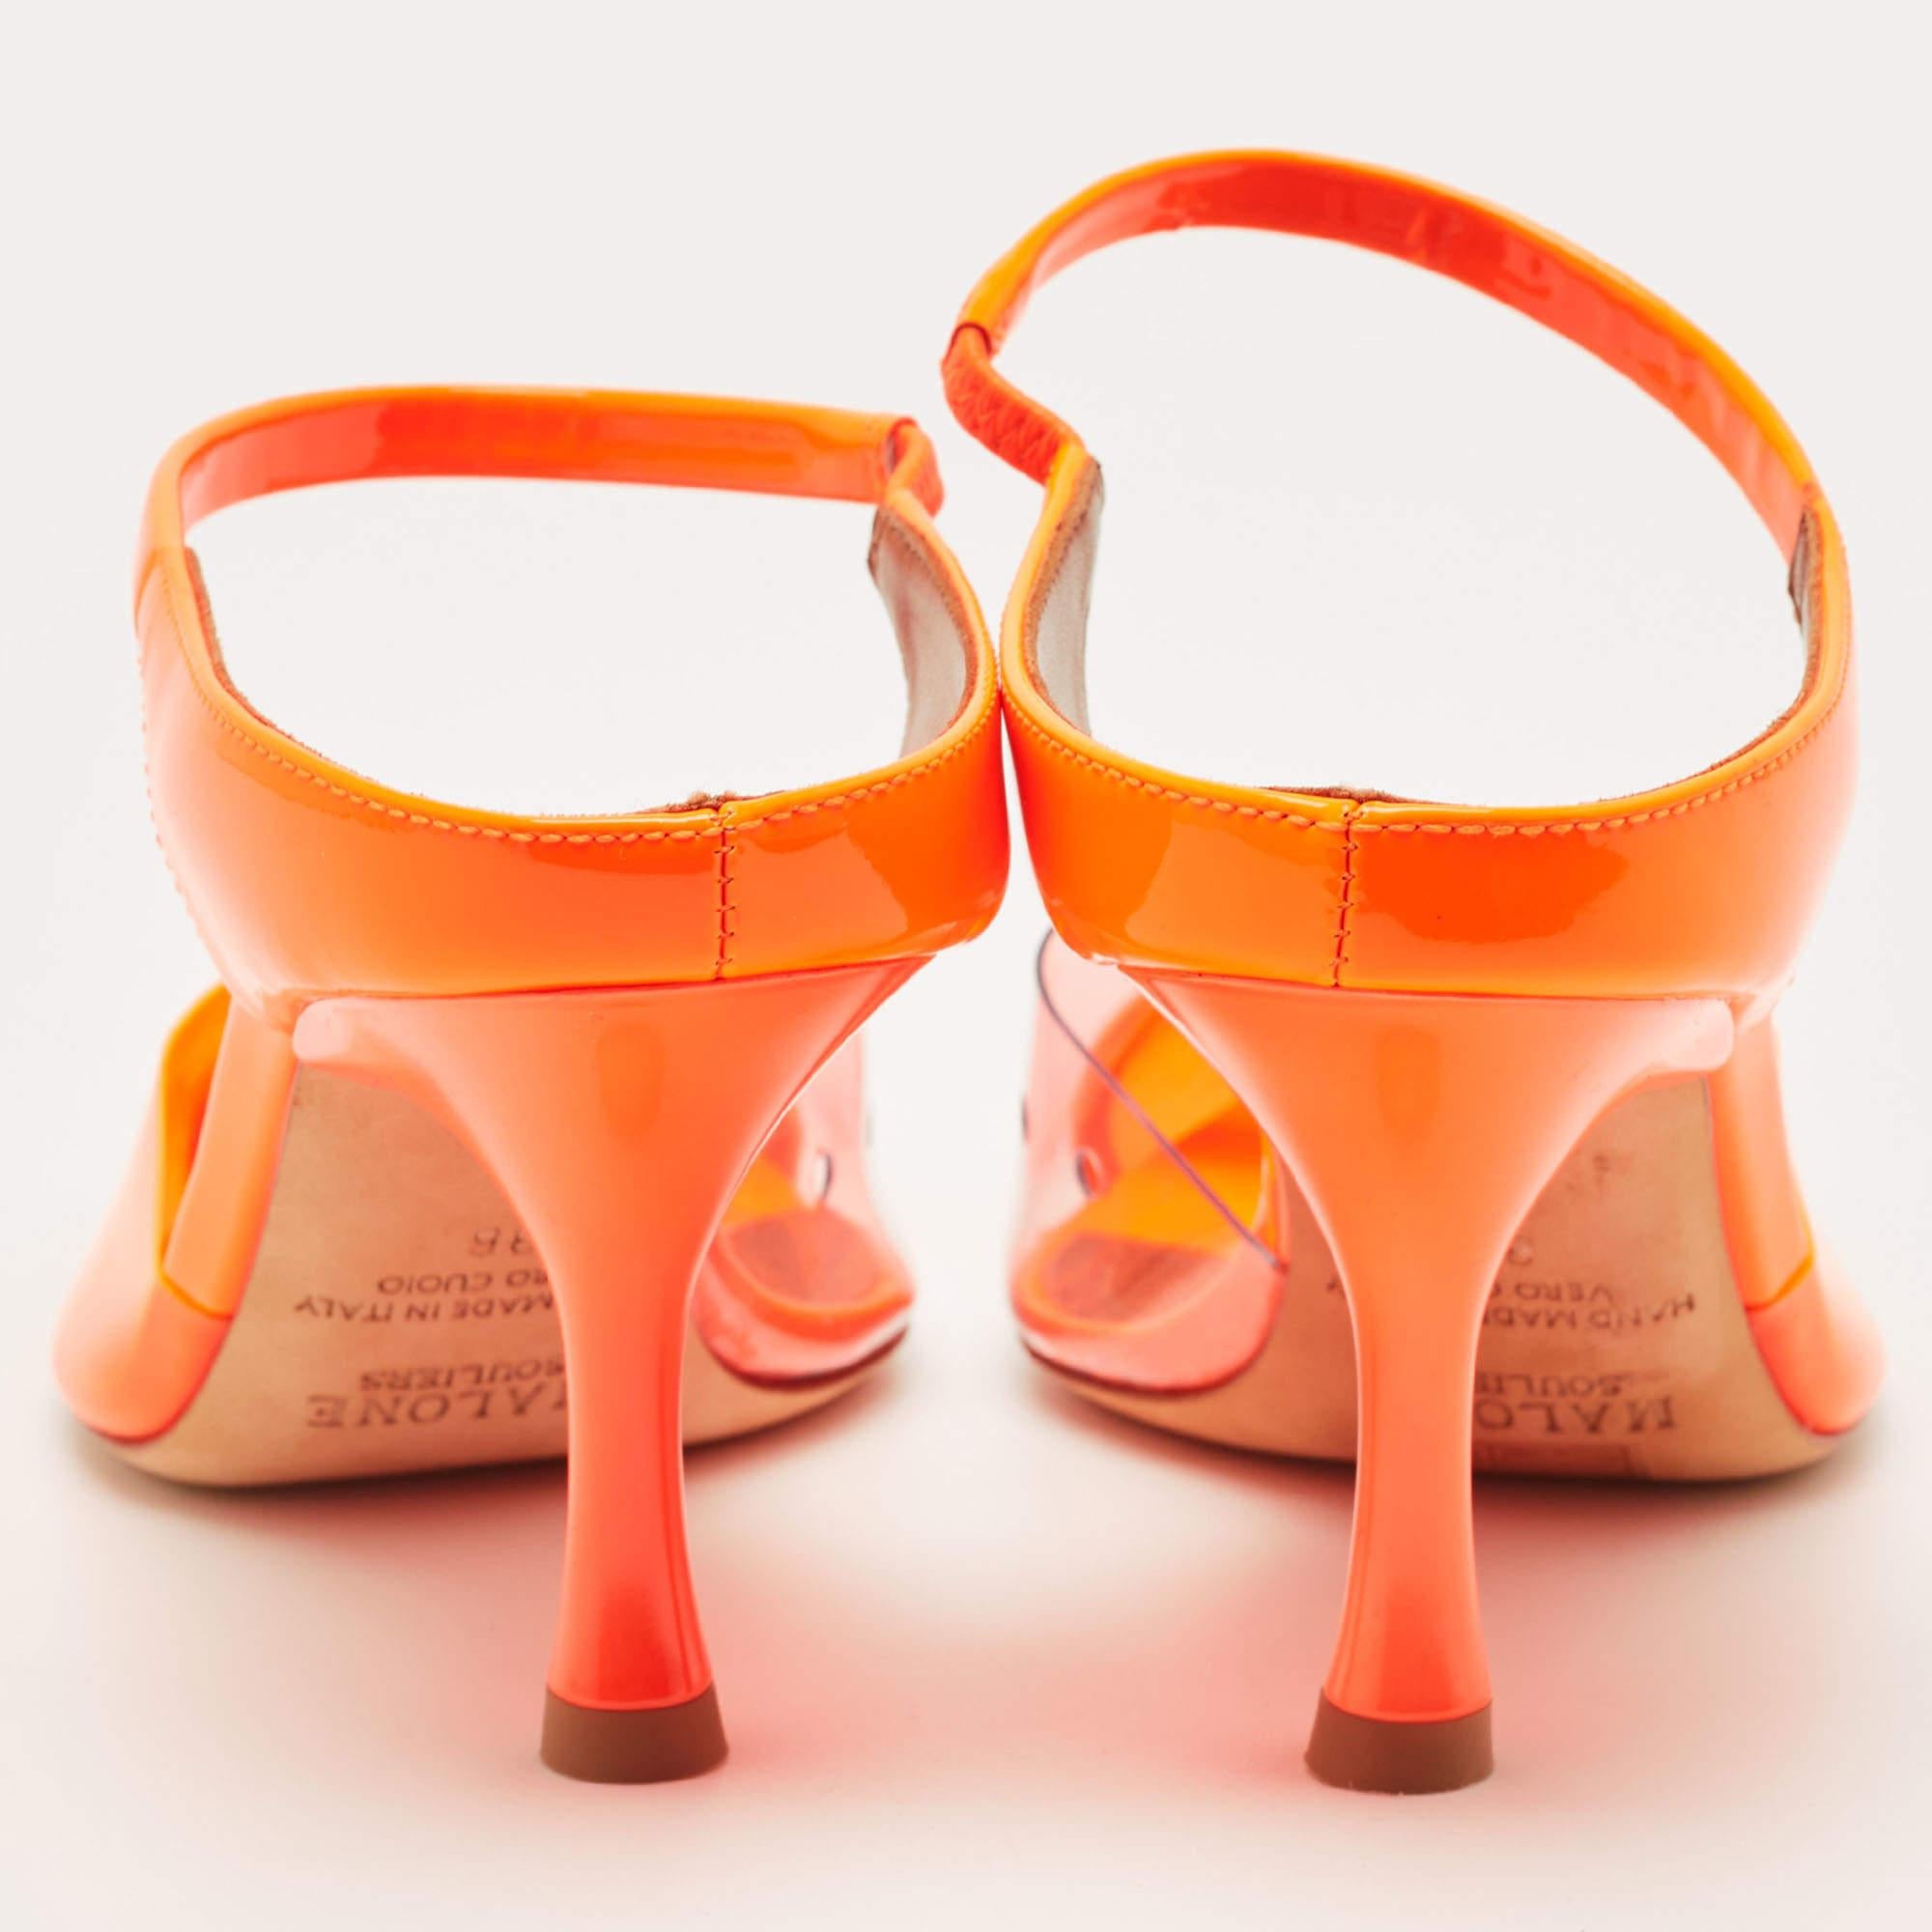 Malone Souliers Neon Orange PVC and Patent Leather Lona Mules Size 36 2